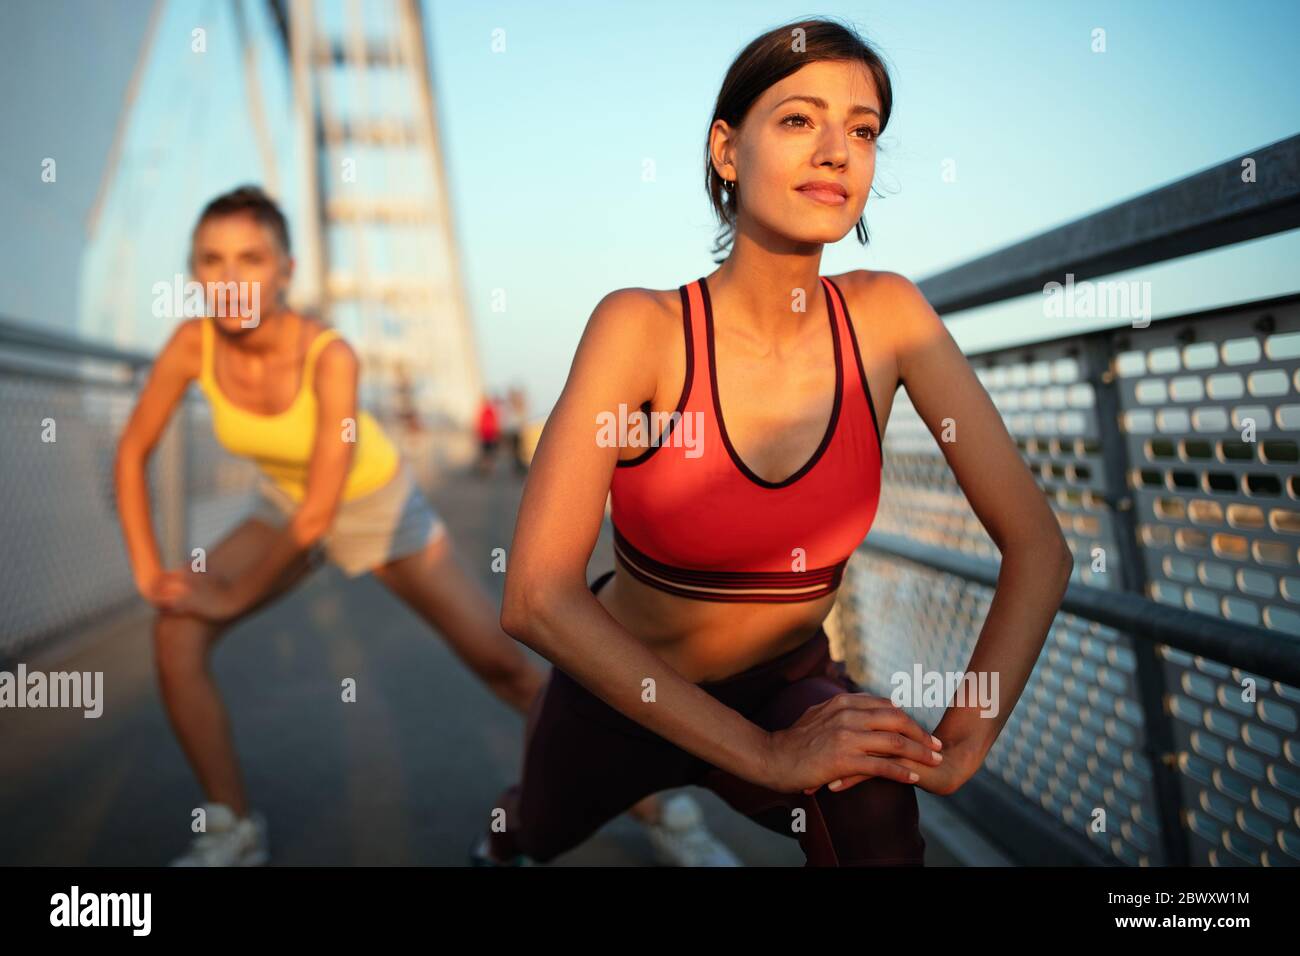 Fitness, sport, people, exercising and healthy lifestyle concept. Happy fit friends working out Stock Photo